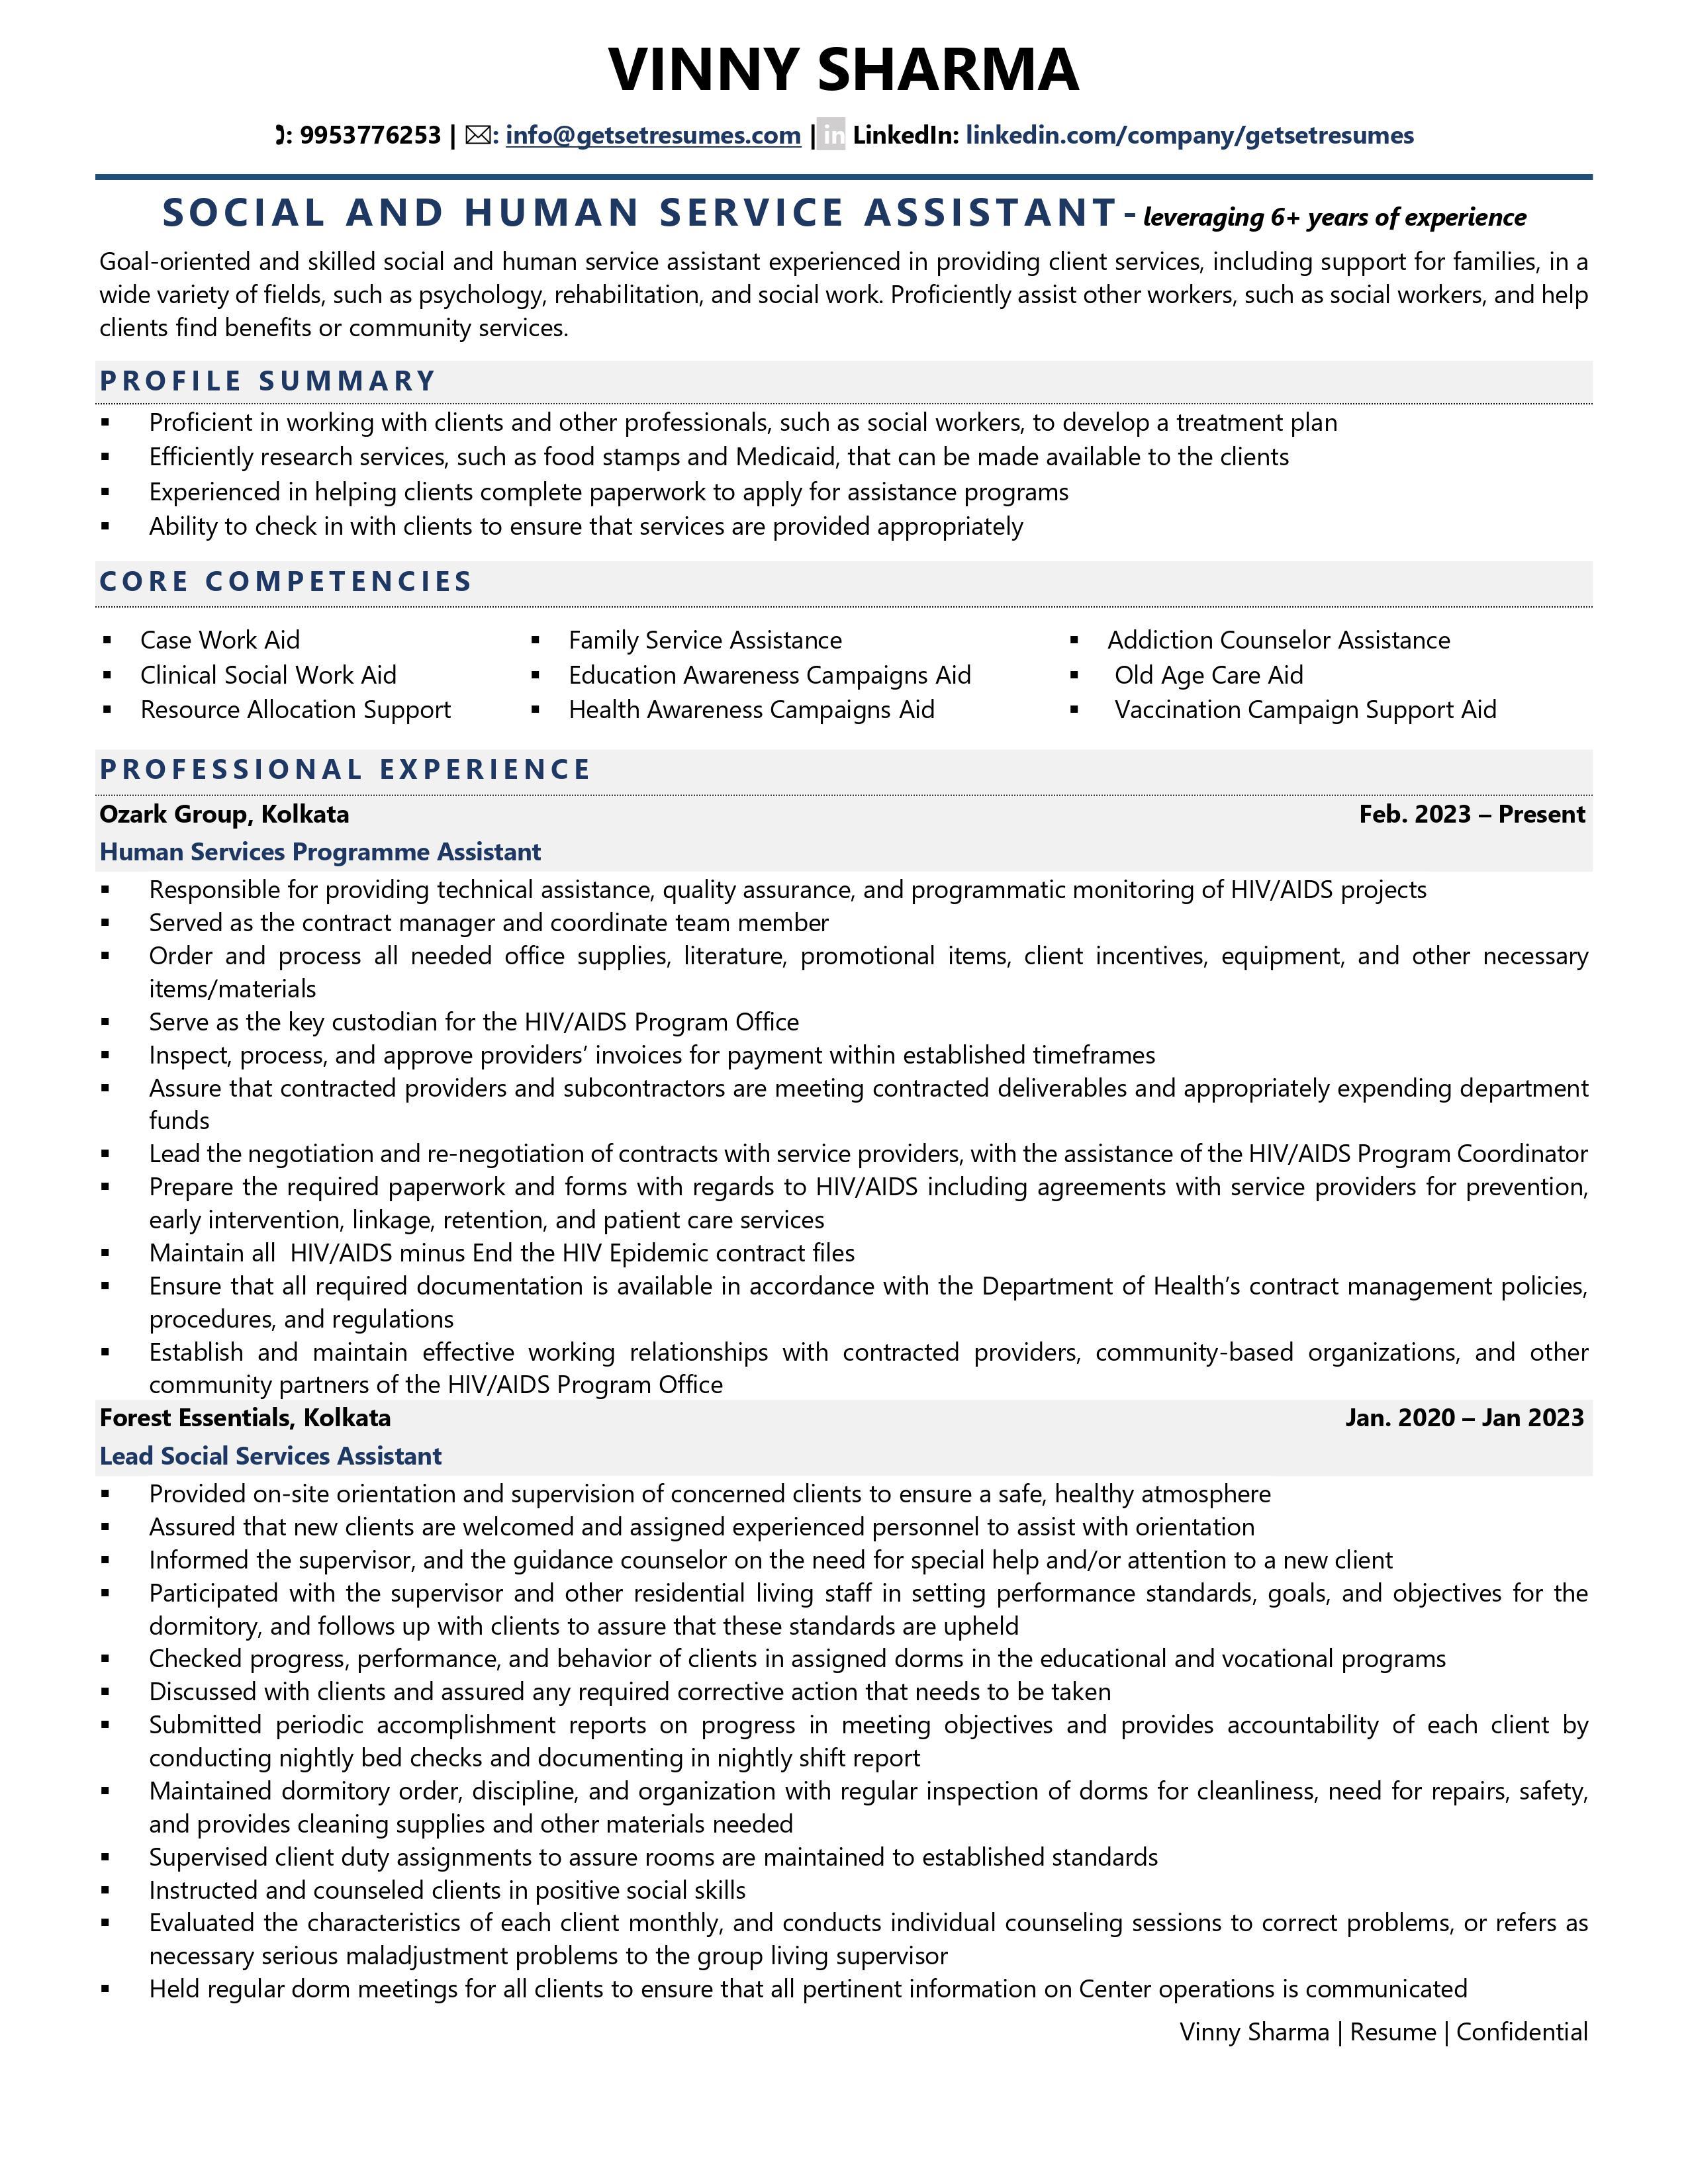 Social and Human Service Assistant - Resume Example & Template